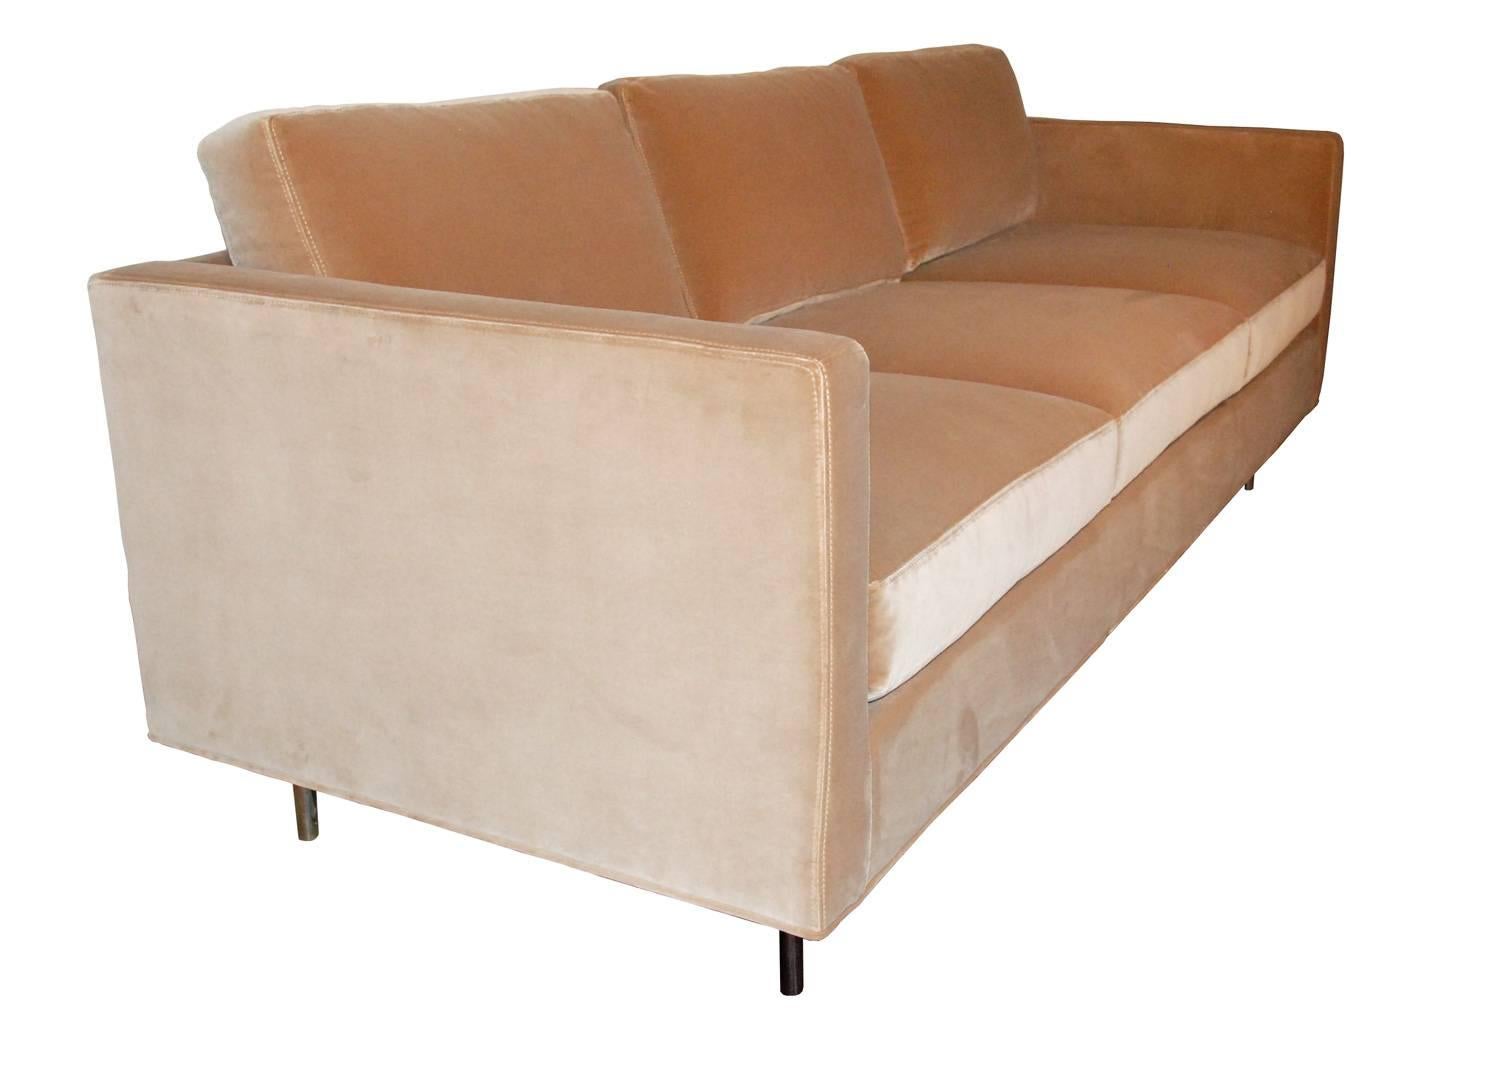 This Milo Baughman sofa by Thayer Coggin is all luxury and comfort. Upholstered in a camel/caramel velvet, it is in near mint condition. Seats three across and stands on chrome legs. 

Height provided is arm/back height; cushions extend beyond